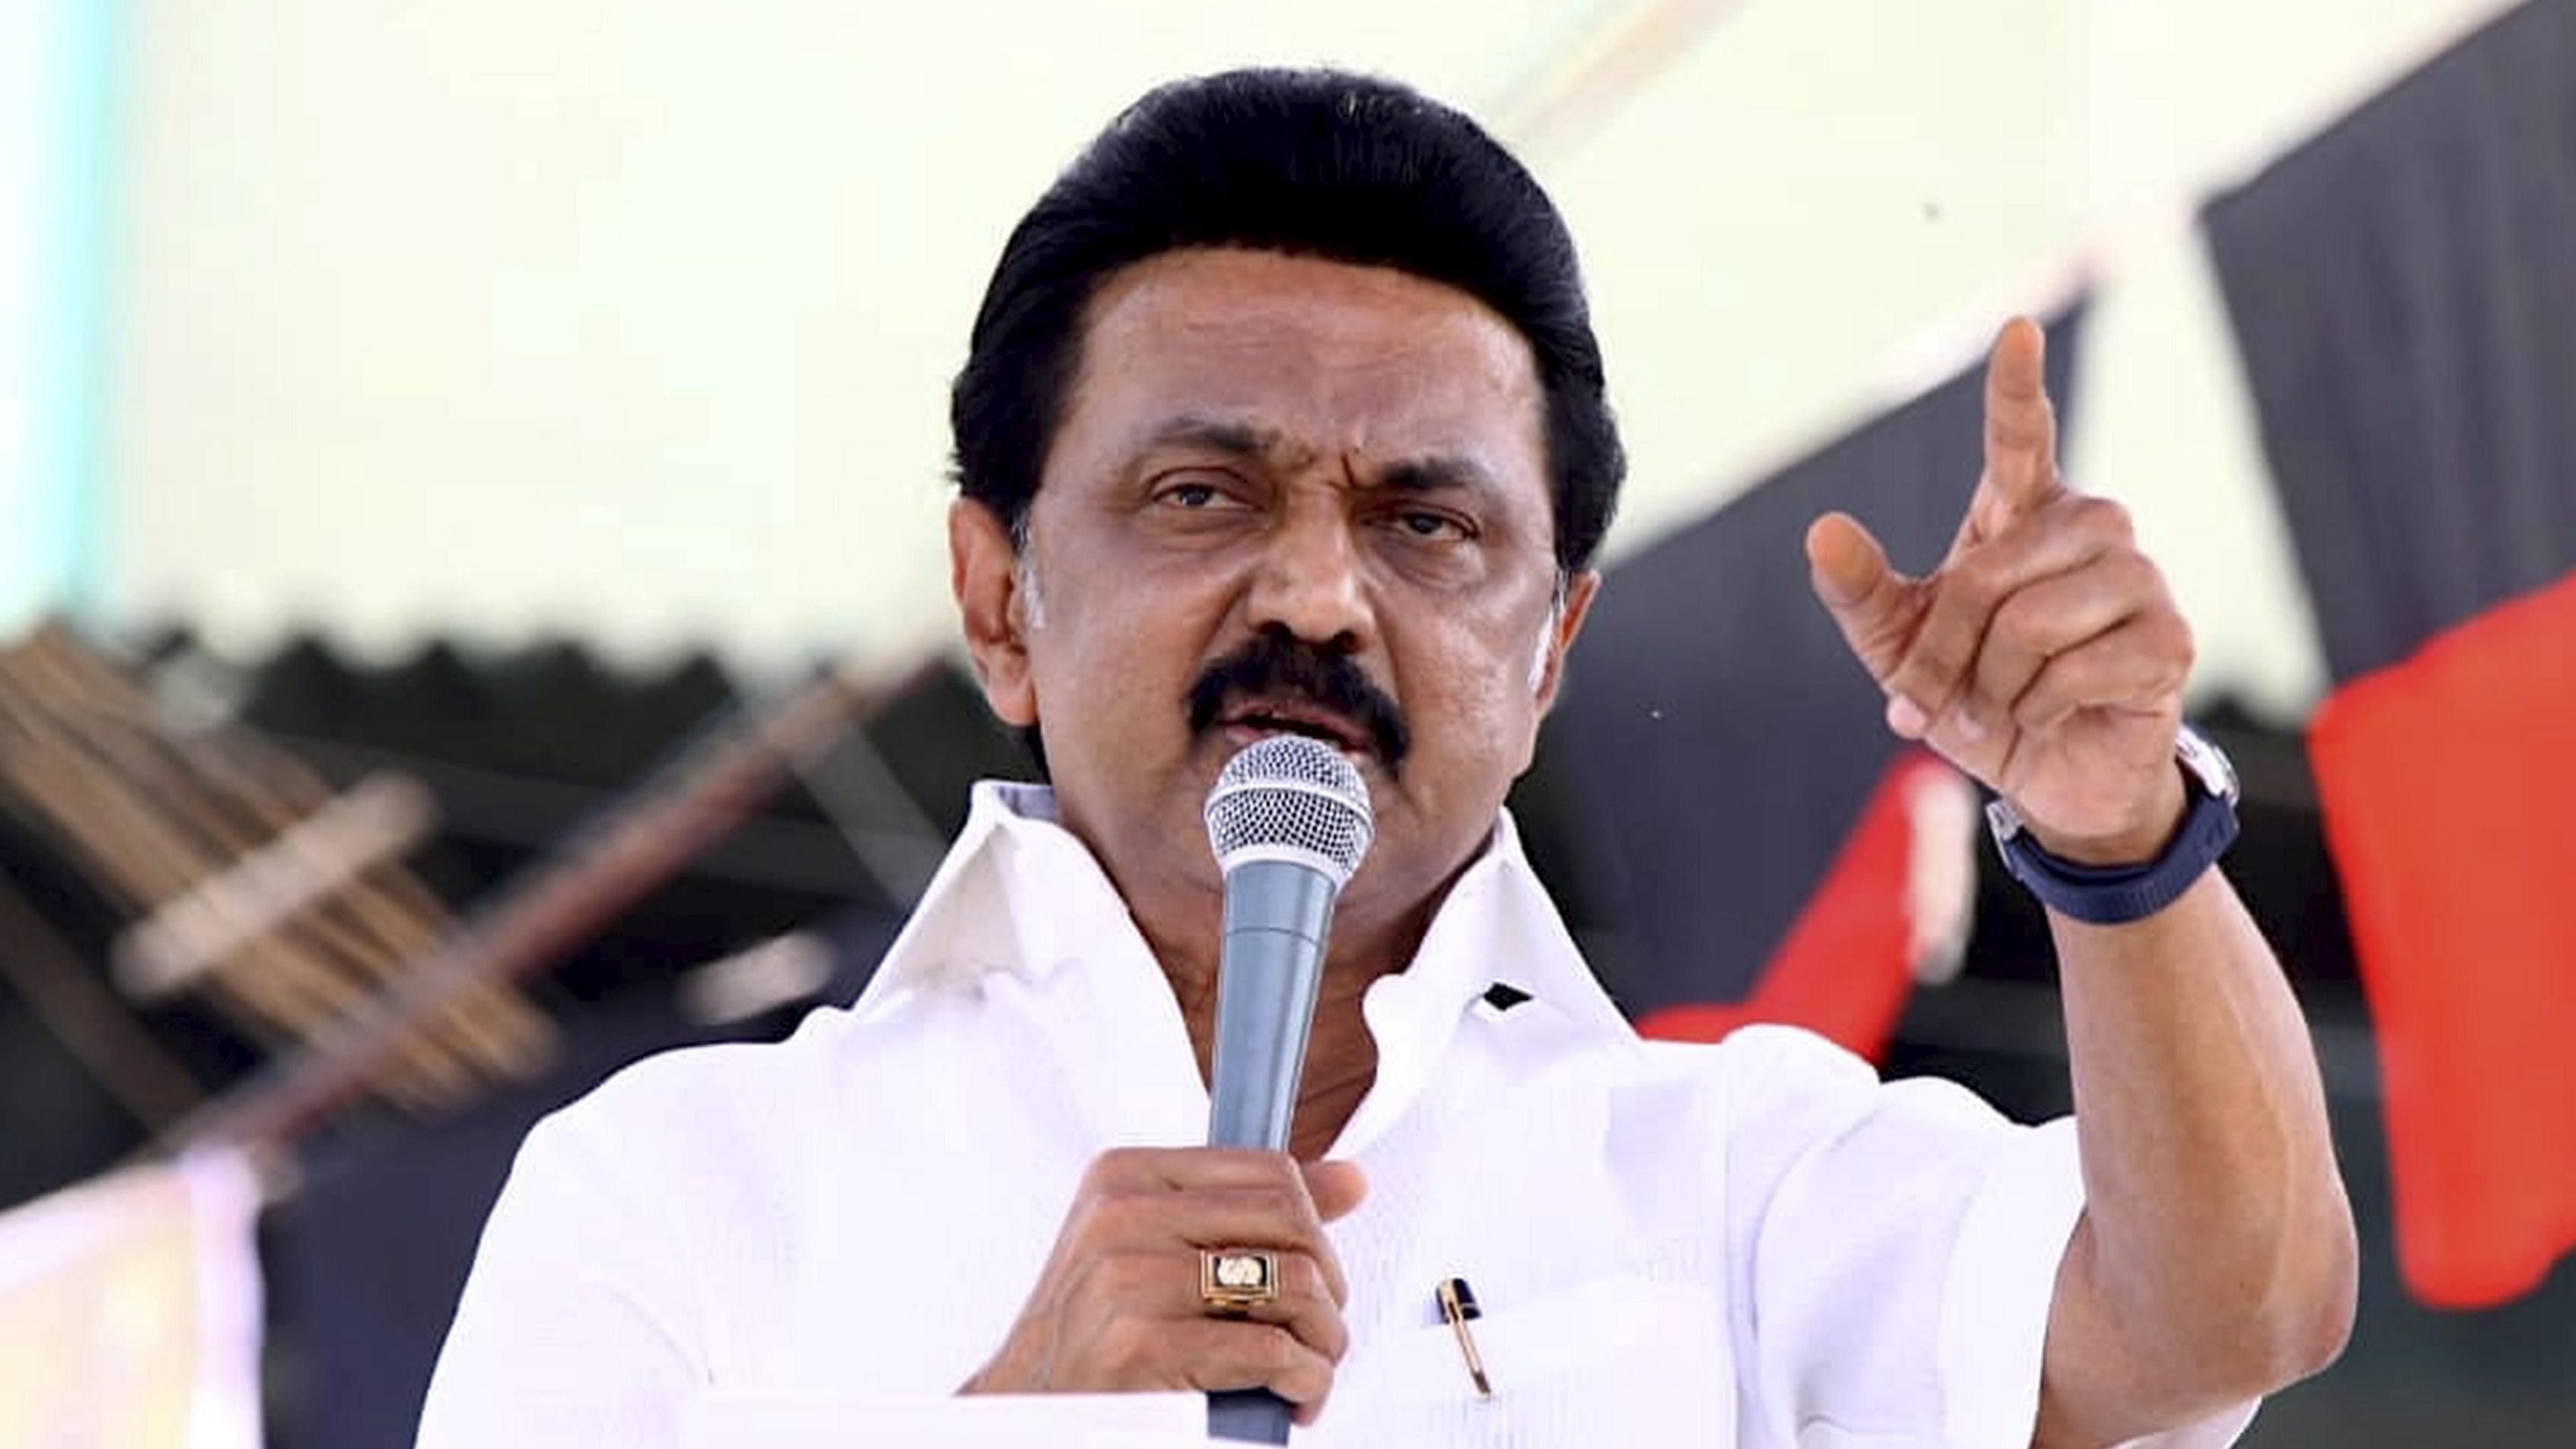 Not a quintessential insider, Stalin's top minister breaks no-row order  amid Madurai tussle | Political Pulse News - The Indian Express